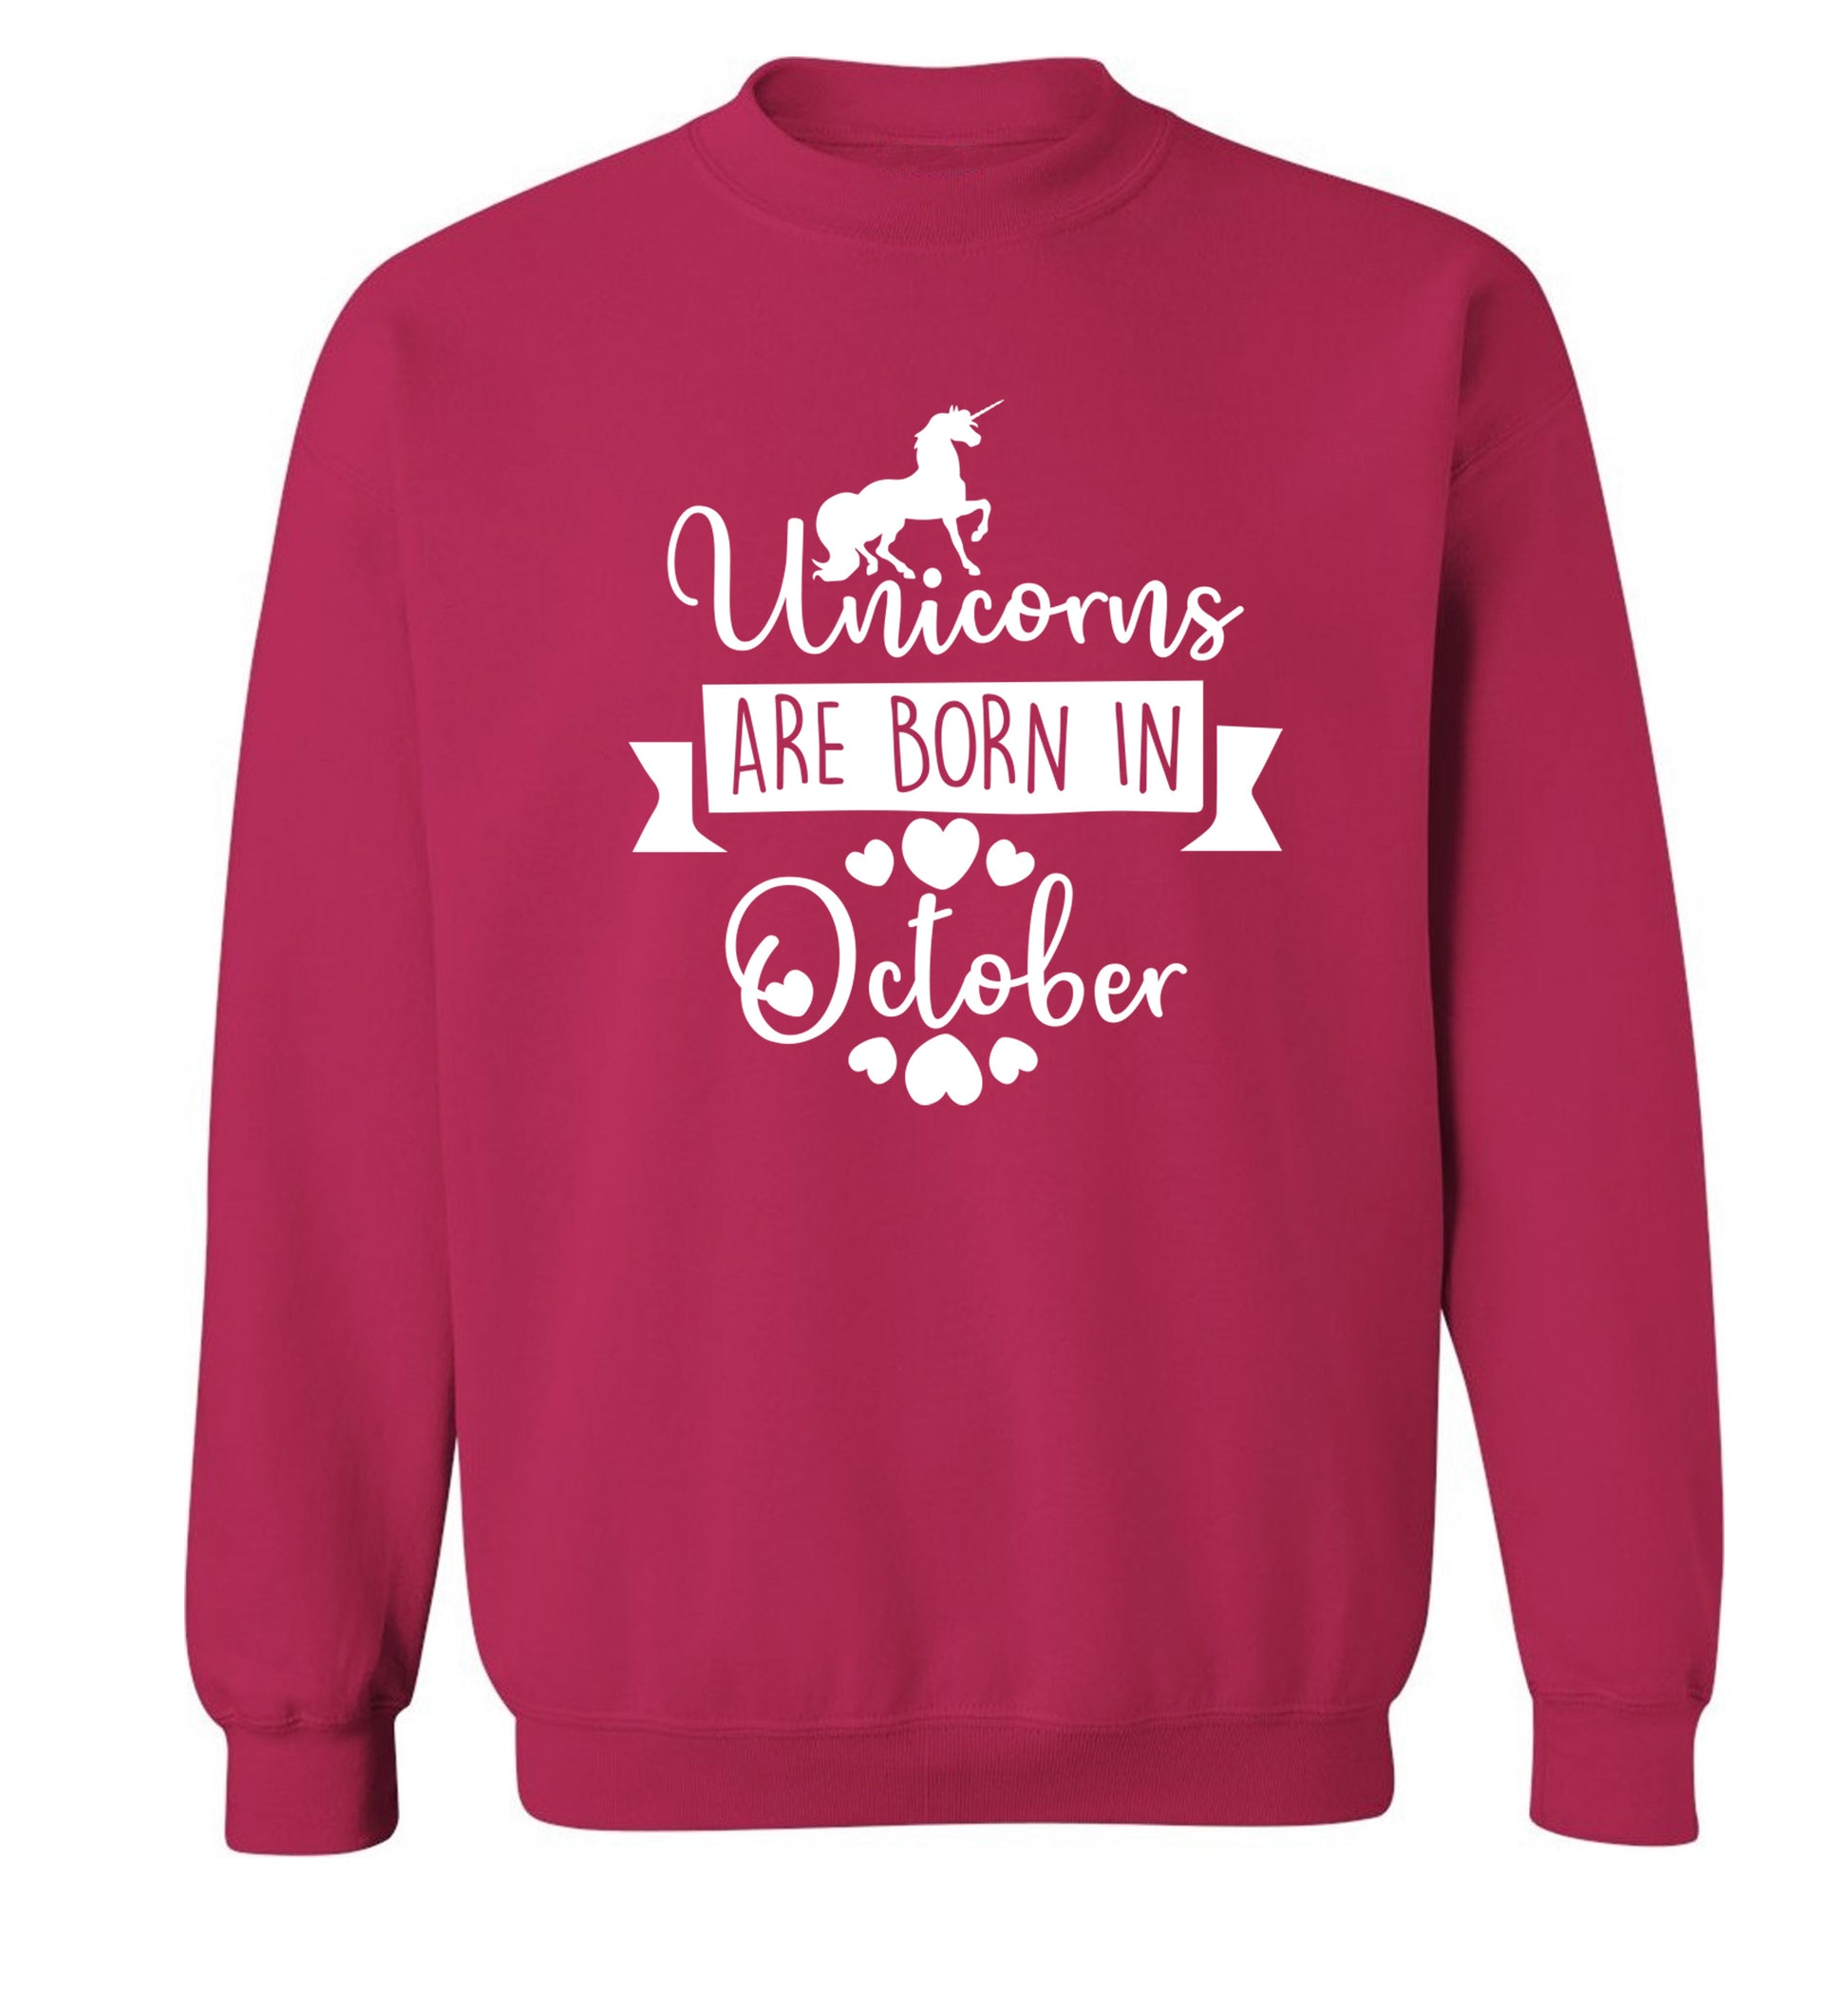 Unicorns are born in October Adult's unisex pink Sweater 2XL